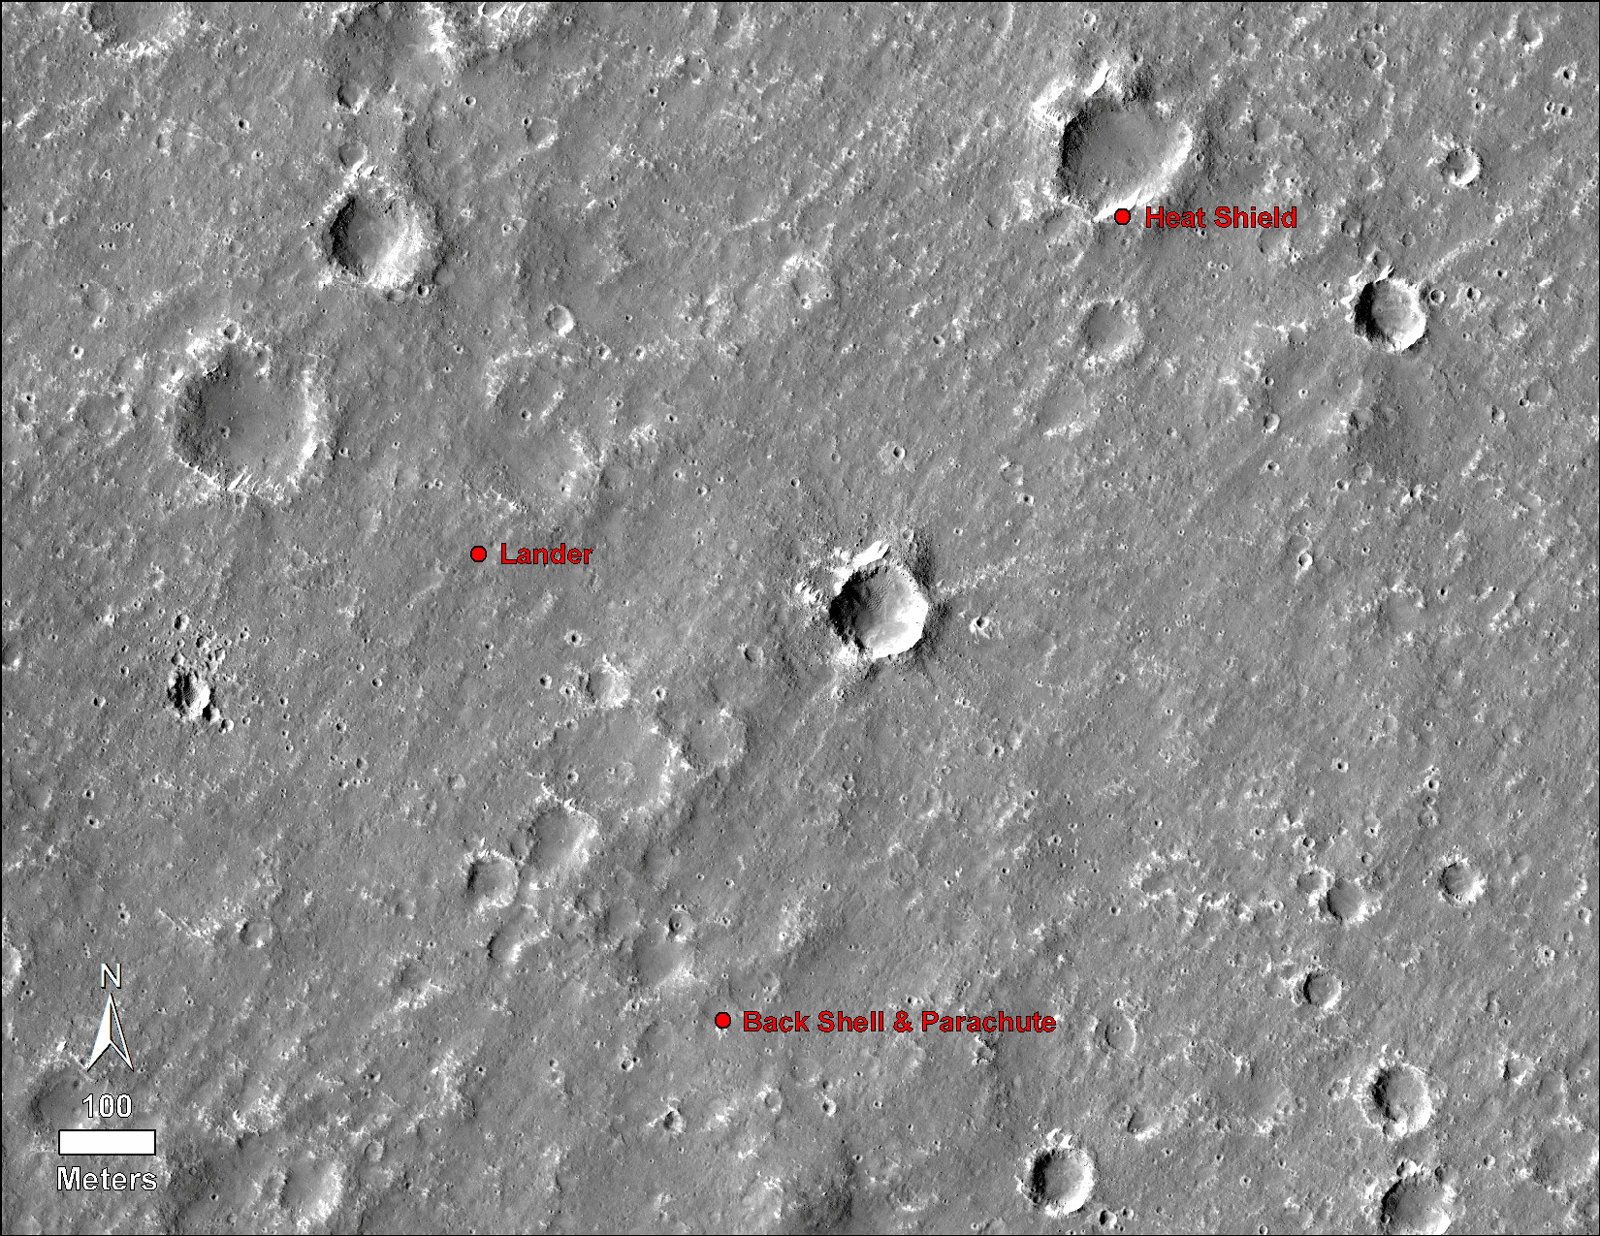 An annotated image of the surface of Mars, taken by the HiRISE camera on NASA's Mars Reconnaissance Orbiter (MRO) on May 30, 2014. The annotations — added after InSight landed on Nov. 26, 2018 — display the locations of NASA's InSight lander, its heat shield and parachute.